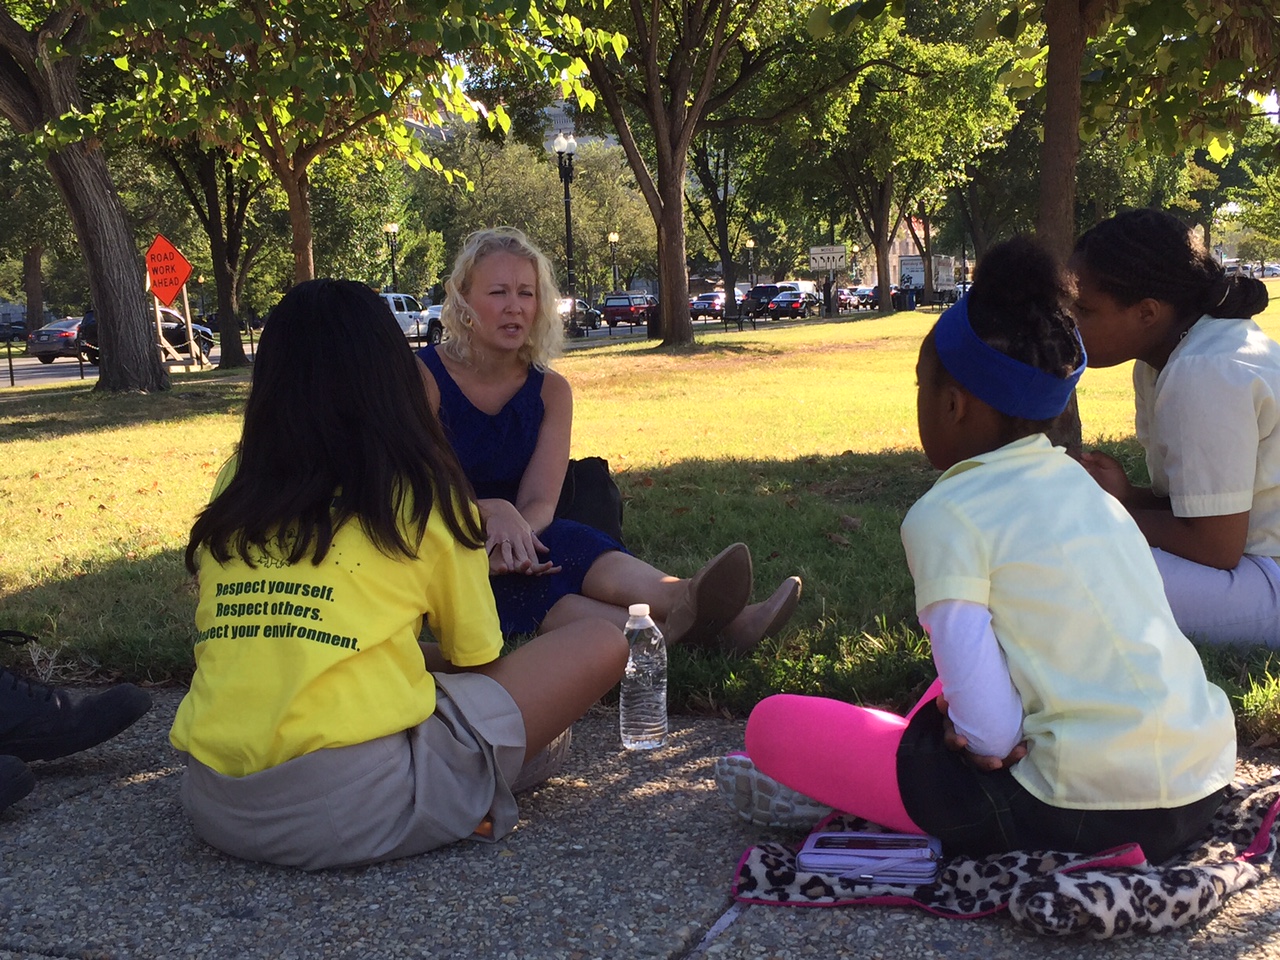 Magnolia Sexton, a military veteran, chats with D.C. students at the National Mall on Friday, Sept. 11, 2015. (WTOP/Dennis Foley)